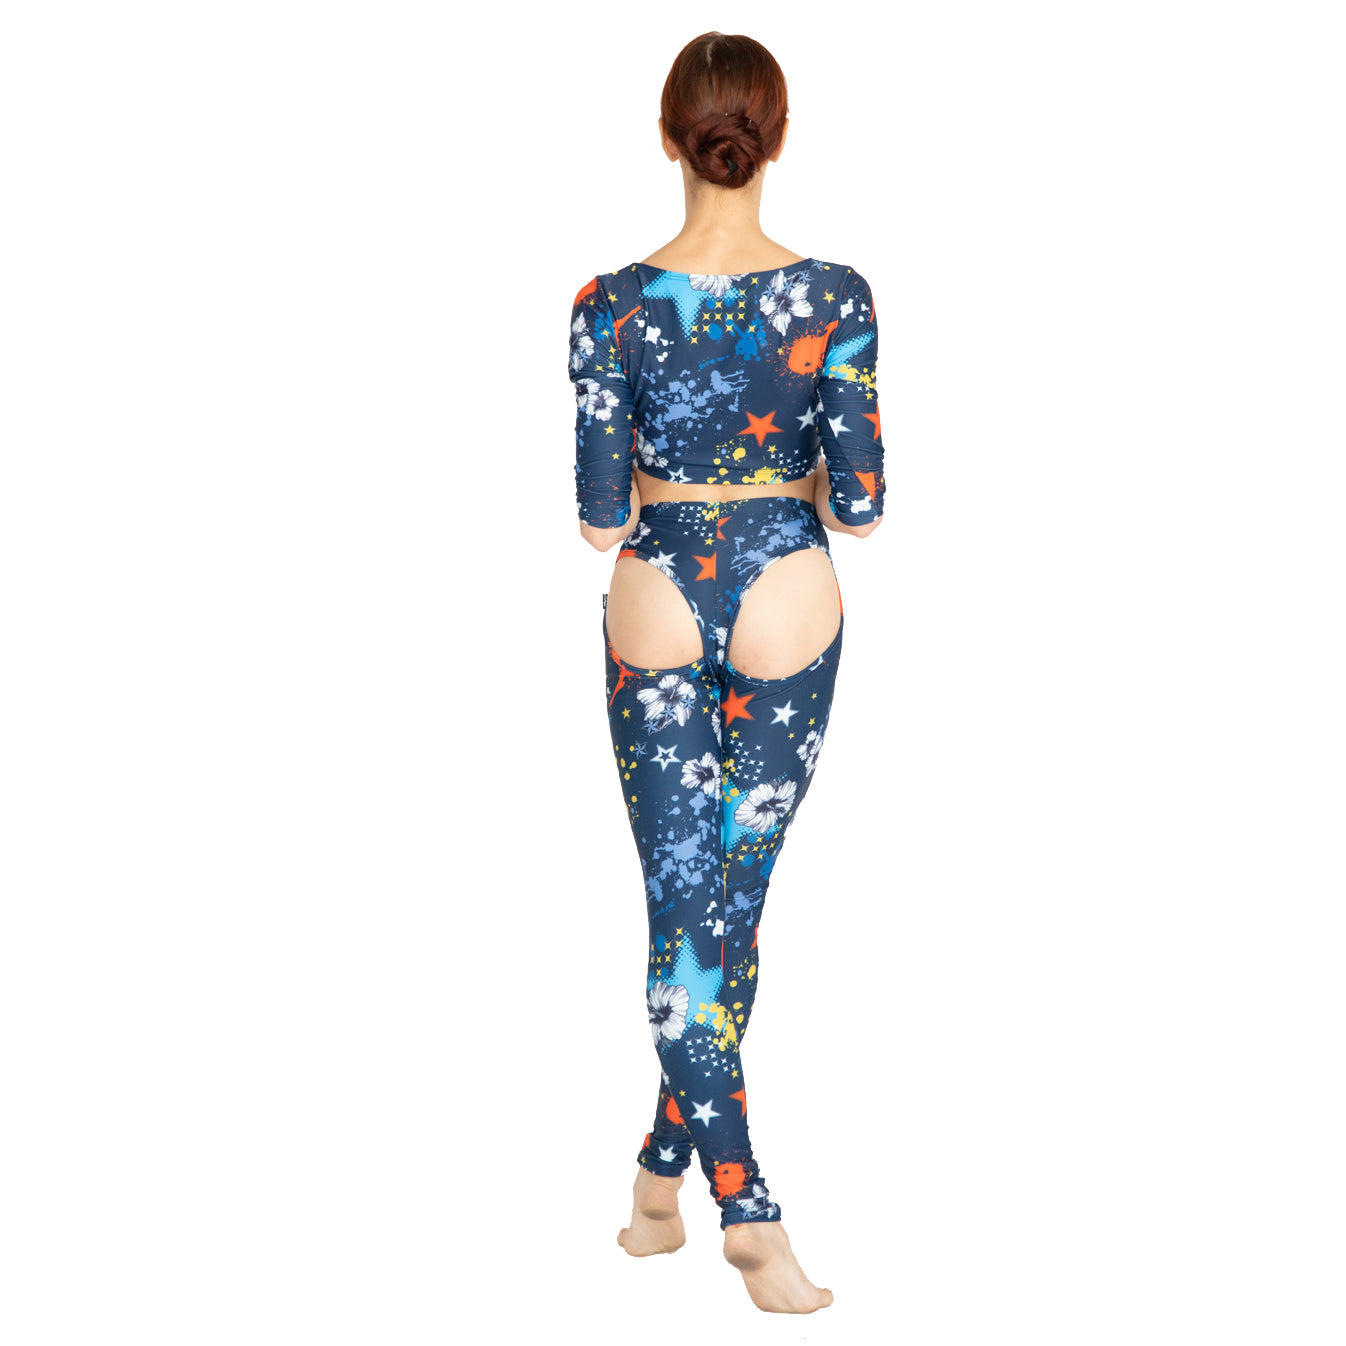 Leggins with rear opening PL127